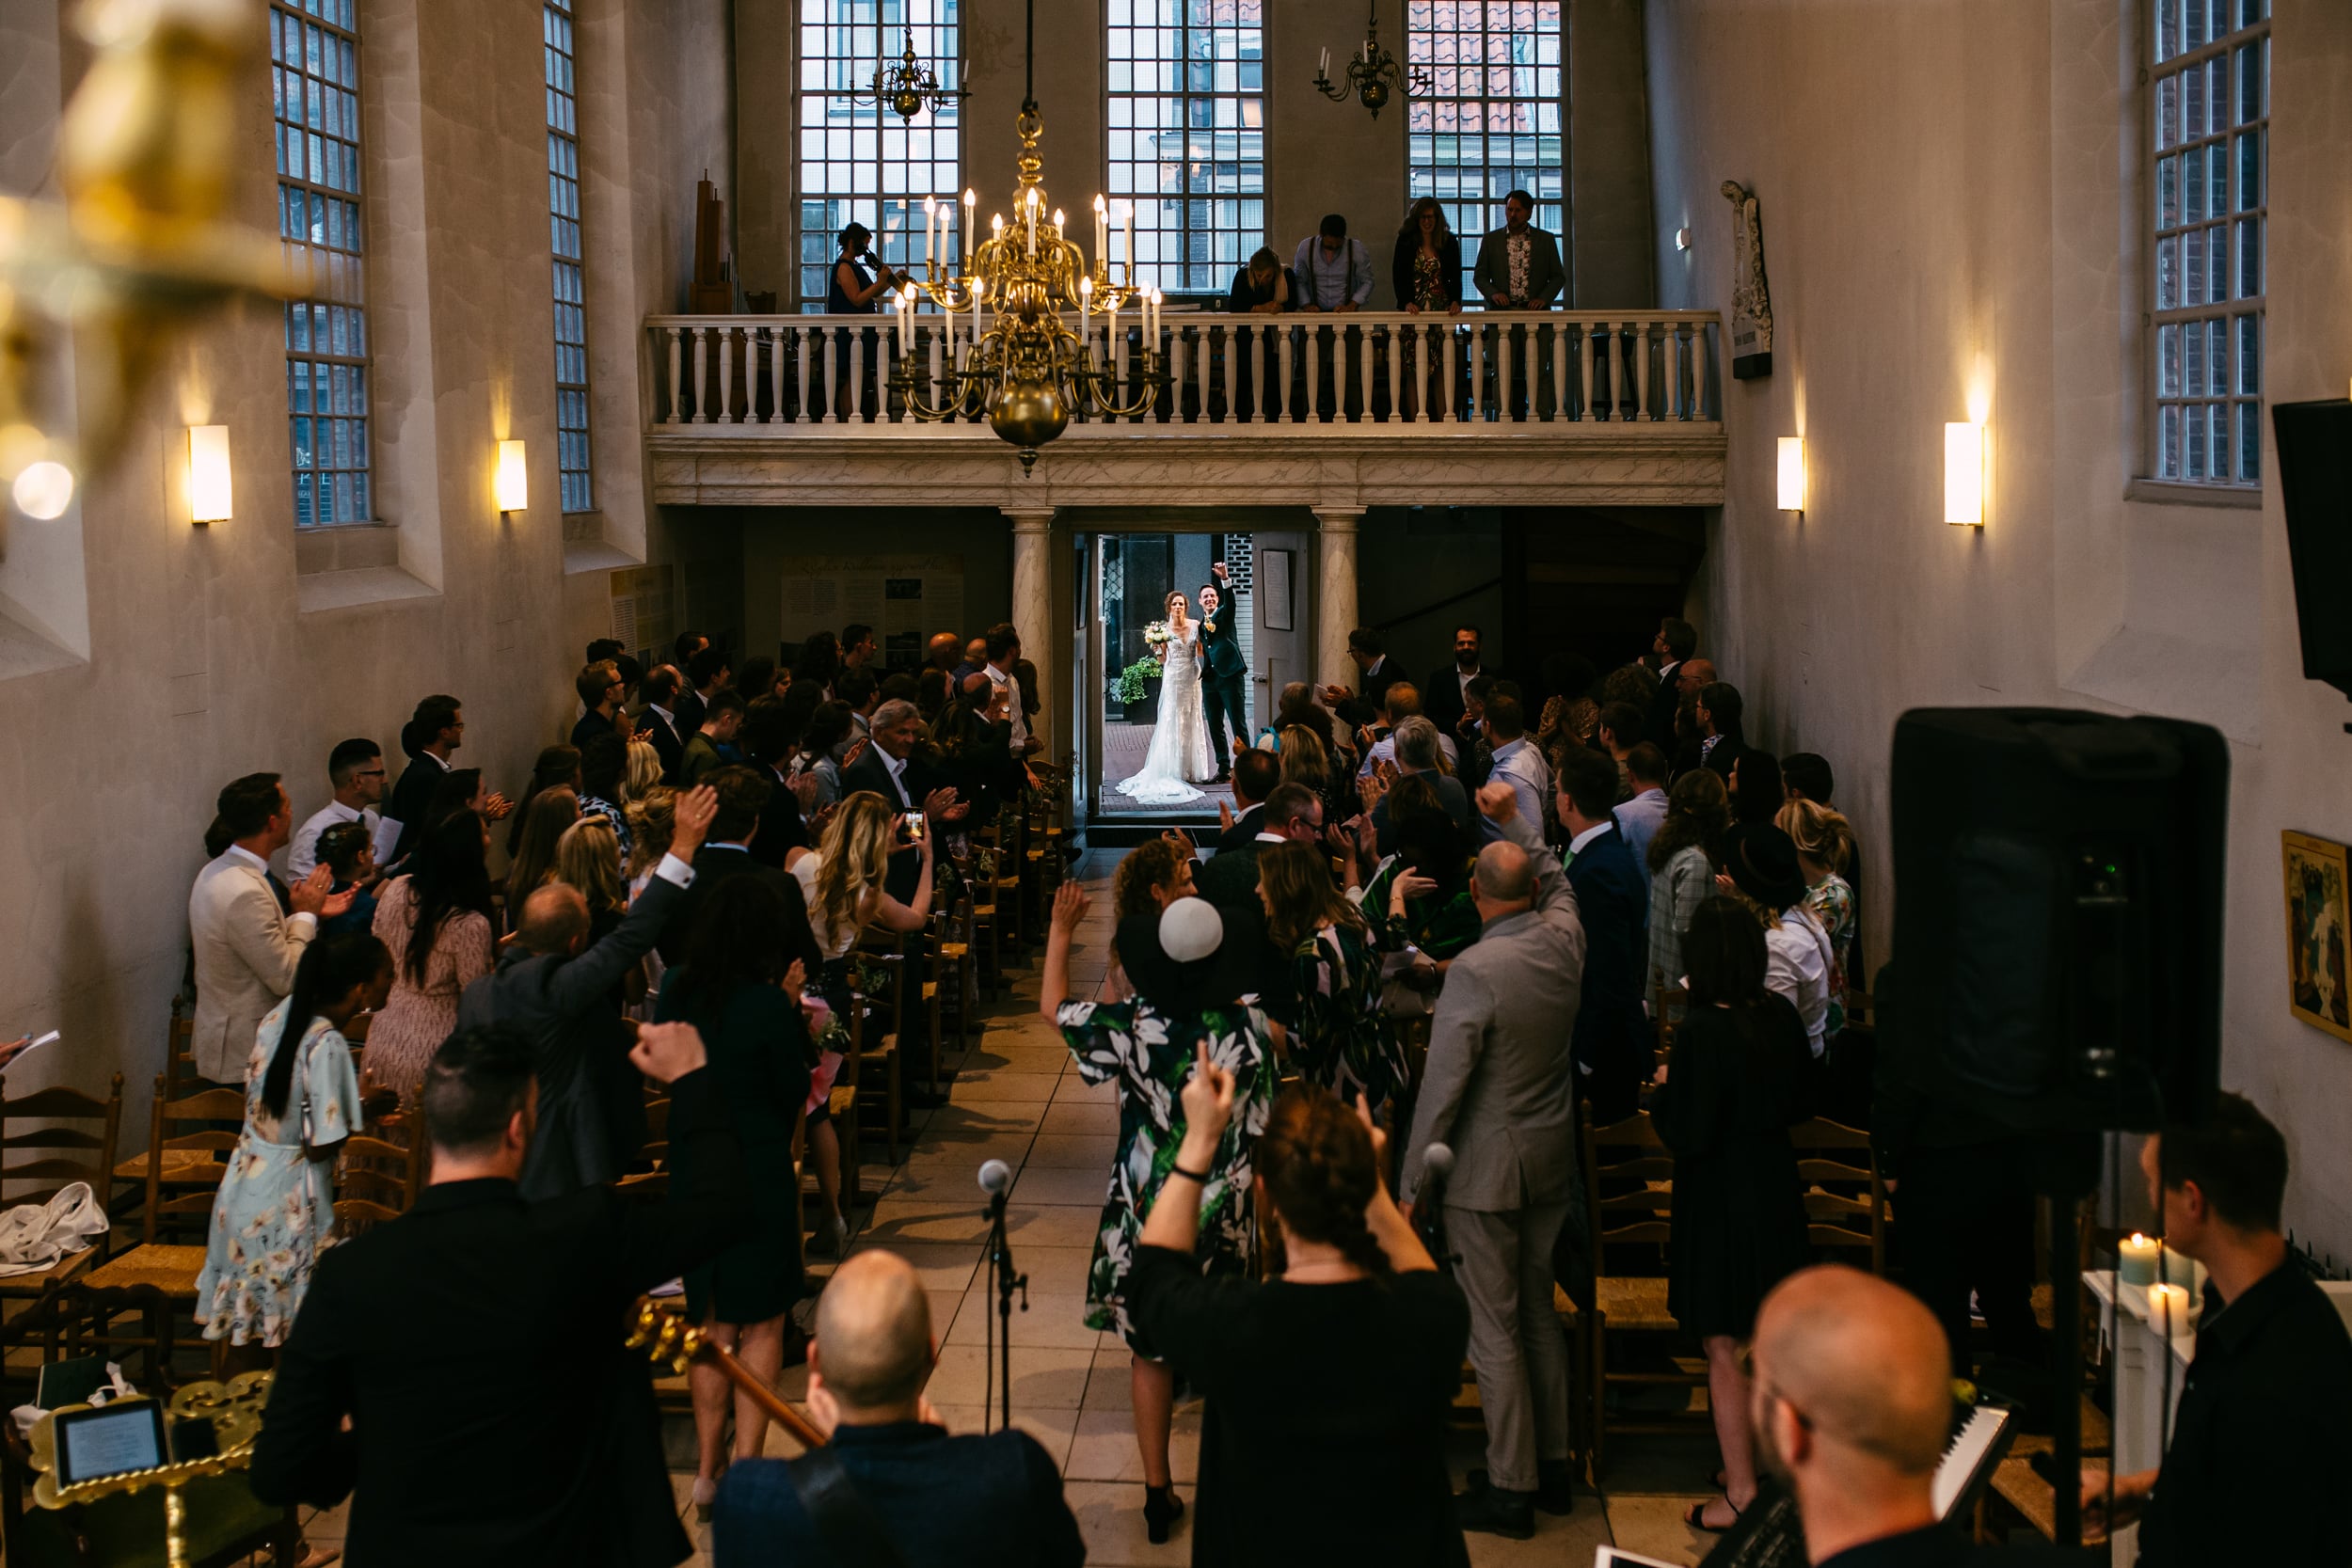 A wedding ceremony in a church with a bride and groom.